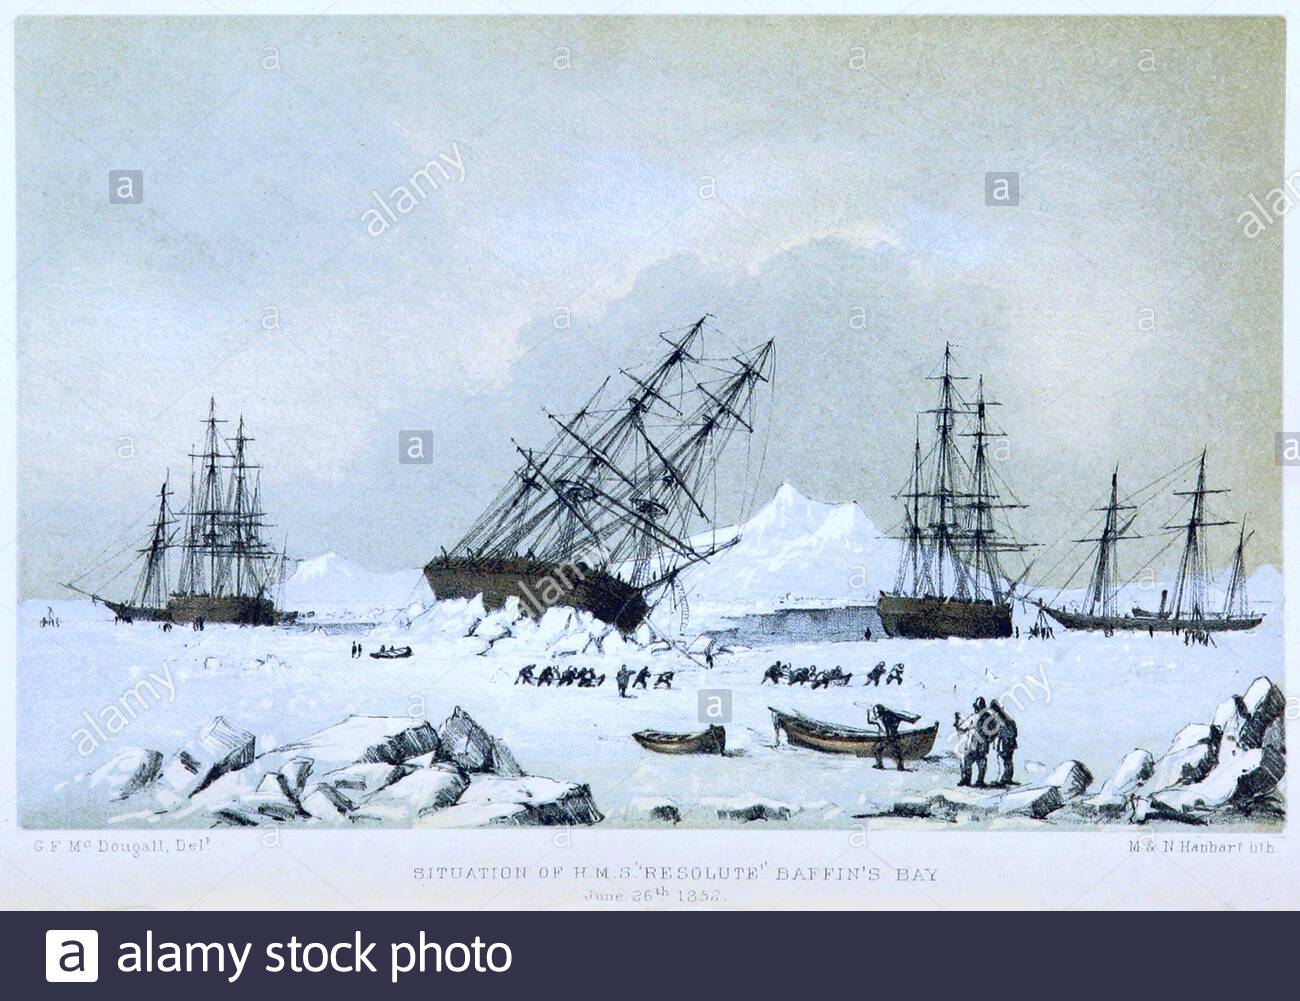 In the search for British Royal Navy officer and Arctic explorer, Captain Sir John Franklin, Situation of HMS Resolute and HMS Intrepid at Baffin Bay, vintage illustration from 1857 Stock Photo